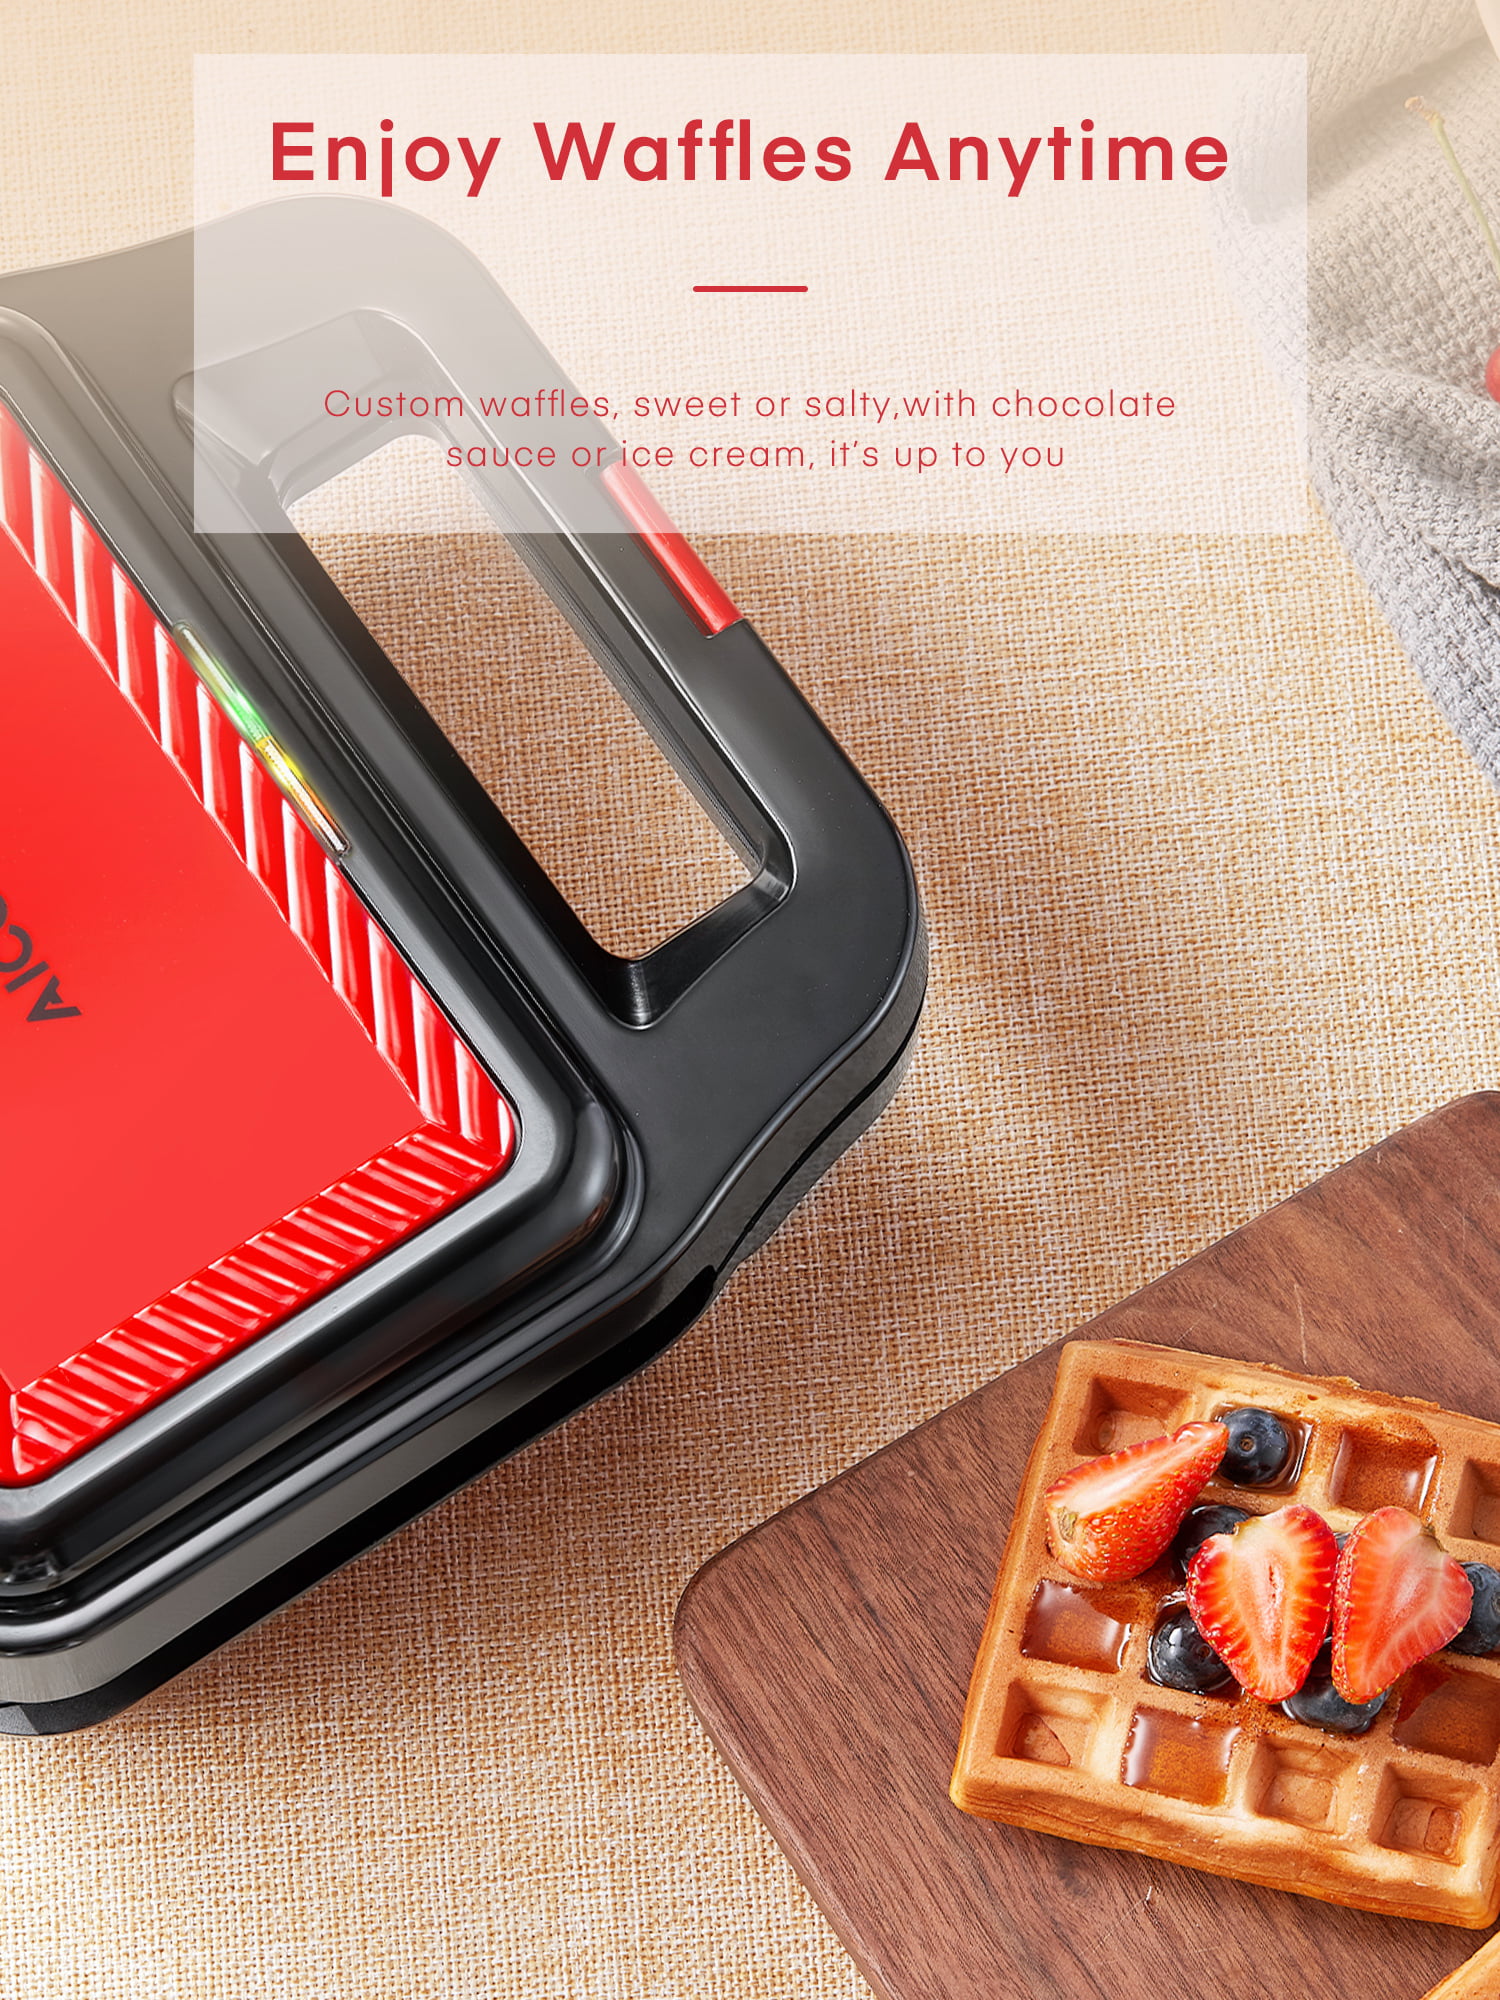  Waffle Maker Mini, Sandwich with Removable Plates, Belgian  Small Breakfast, Donut Maker, 3-in-1 Non-Stick, Compact Design, Keto  Chaffles, Grilled Cheese, Paninis, Gray 600W, 8.15 x 5 x 3.6 inches: Home 